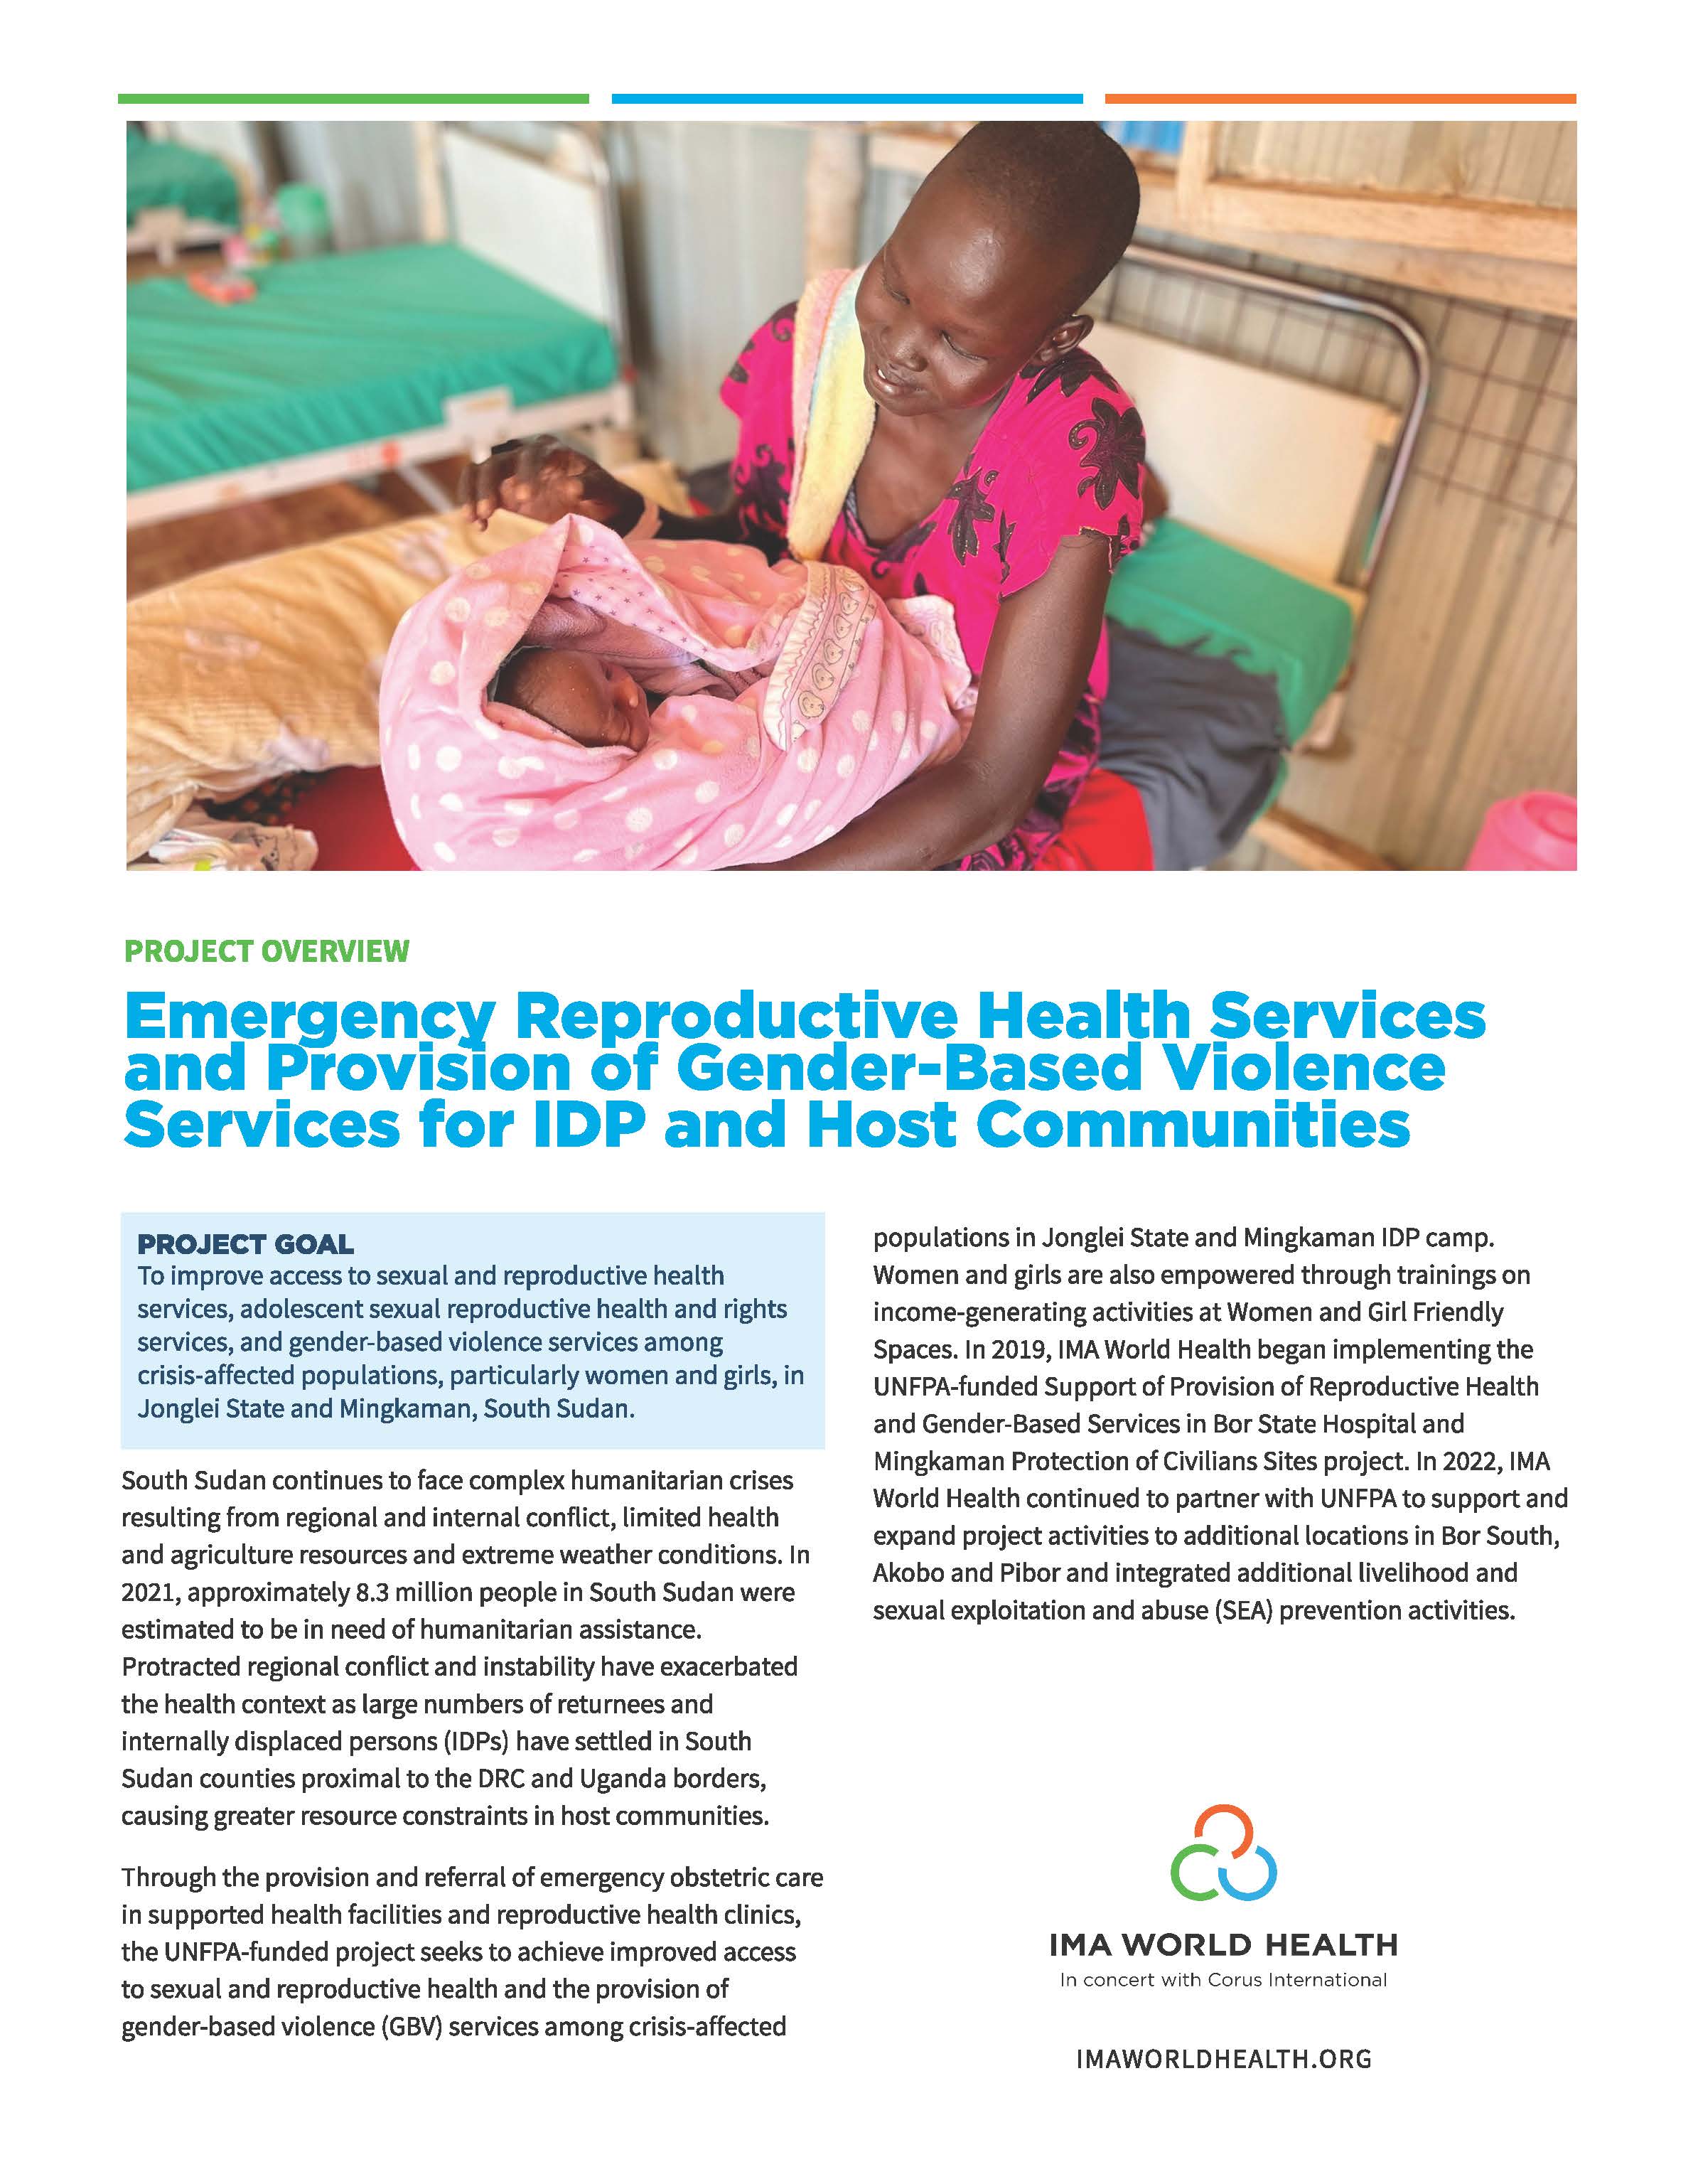 IMA Emergency Reproductive Health Services And Provision Of Gender Based Violence Services For IDP And Host Communities Project Overview Page 1 